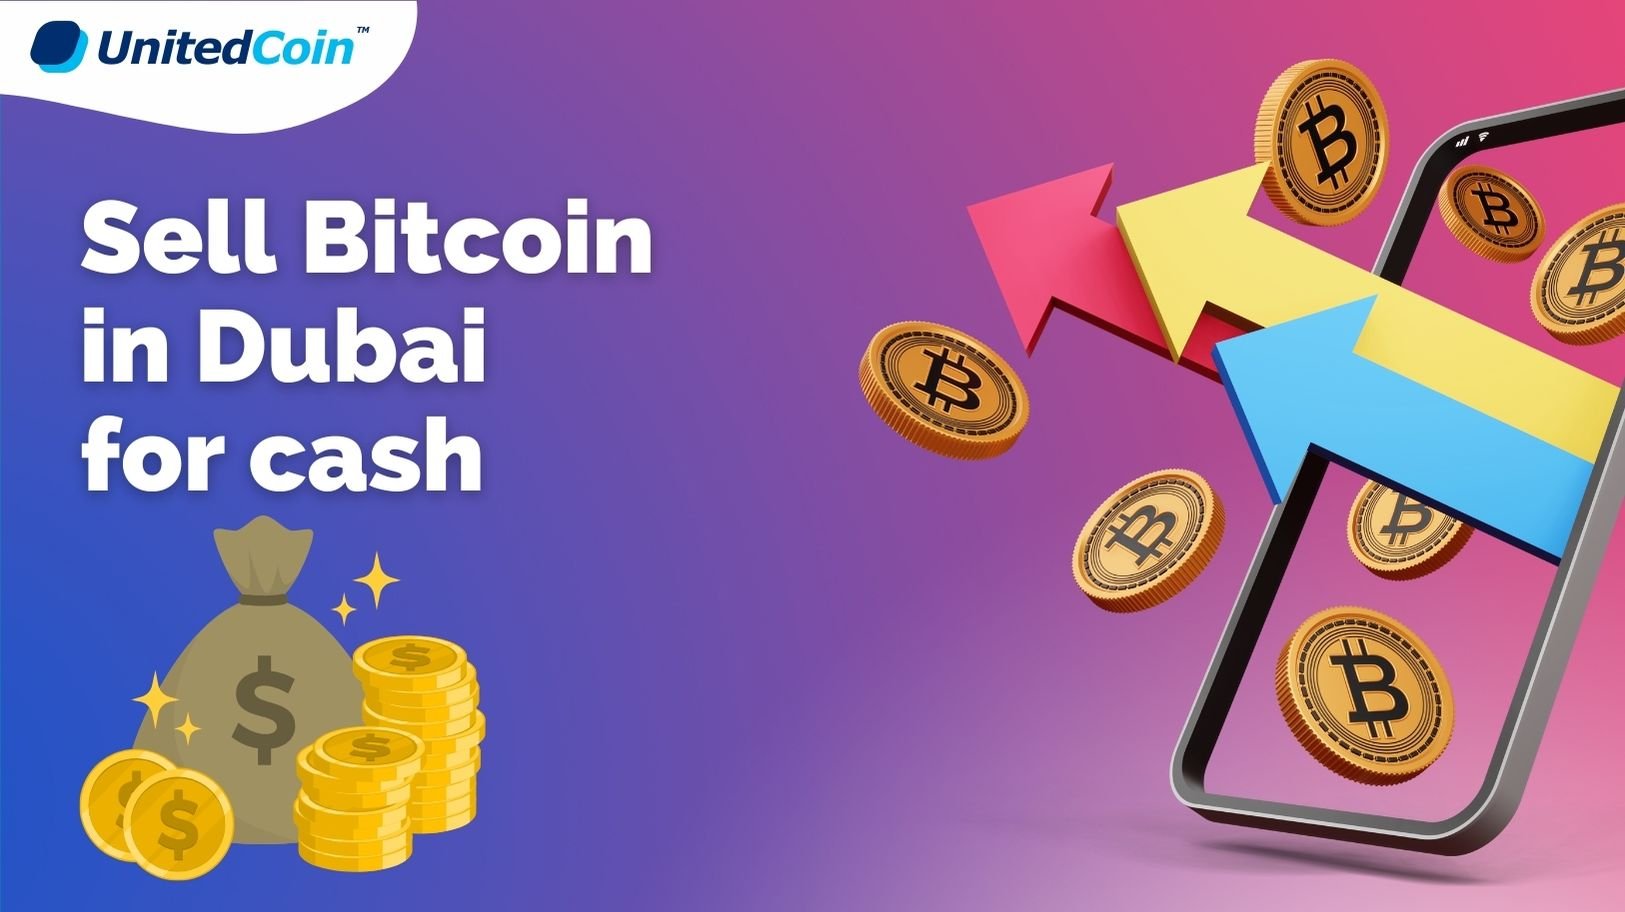 Buy Bitcoin in Dubai, United Arab Emirates - Pay with Cash Deposit To Bank